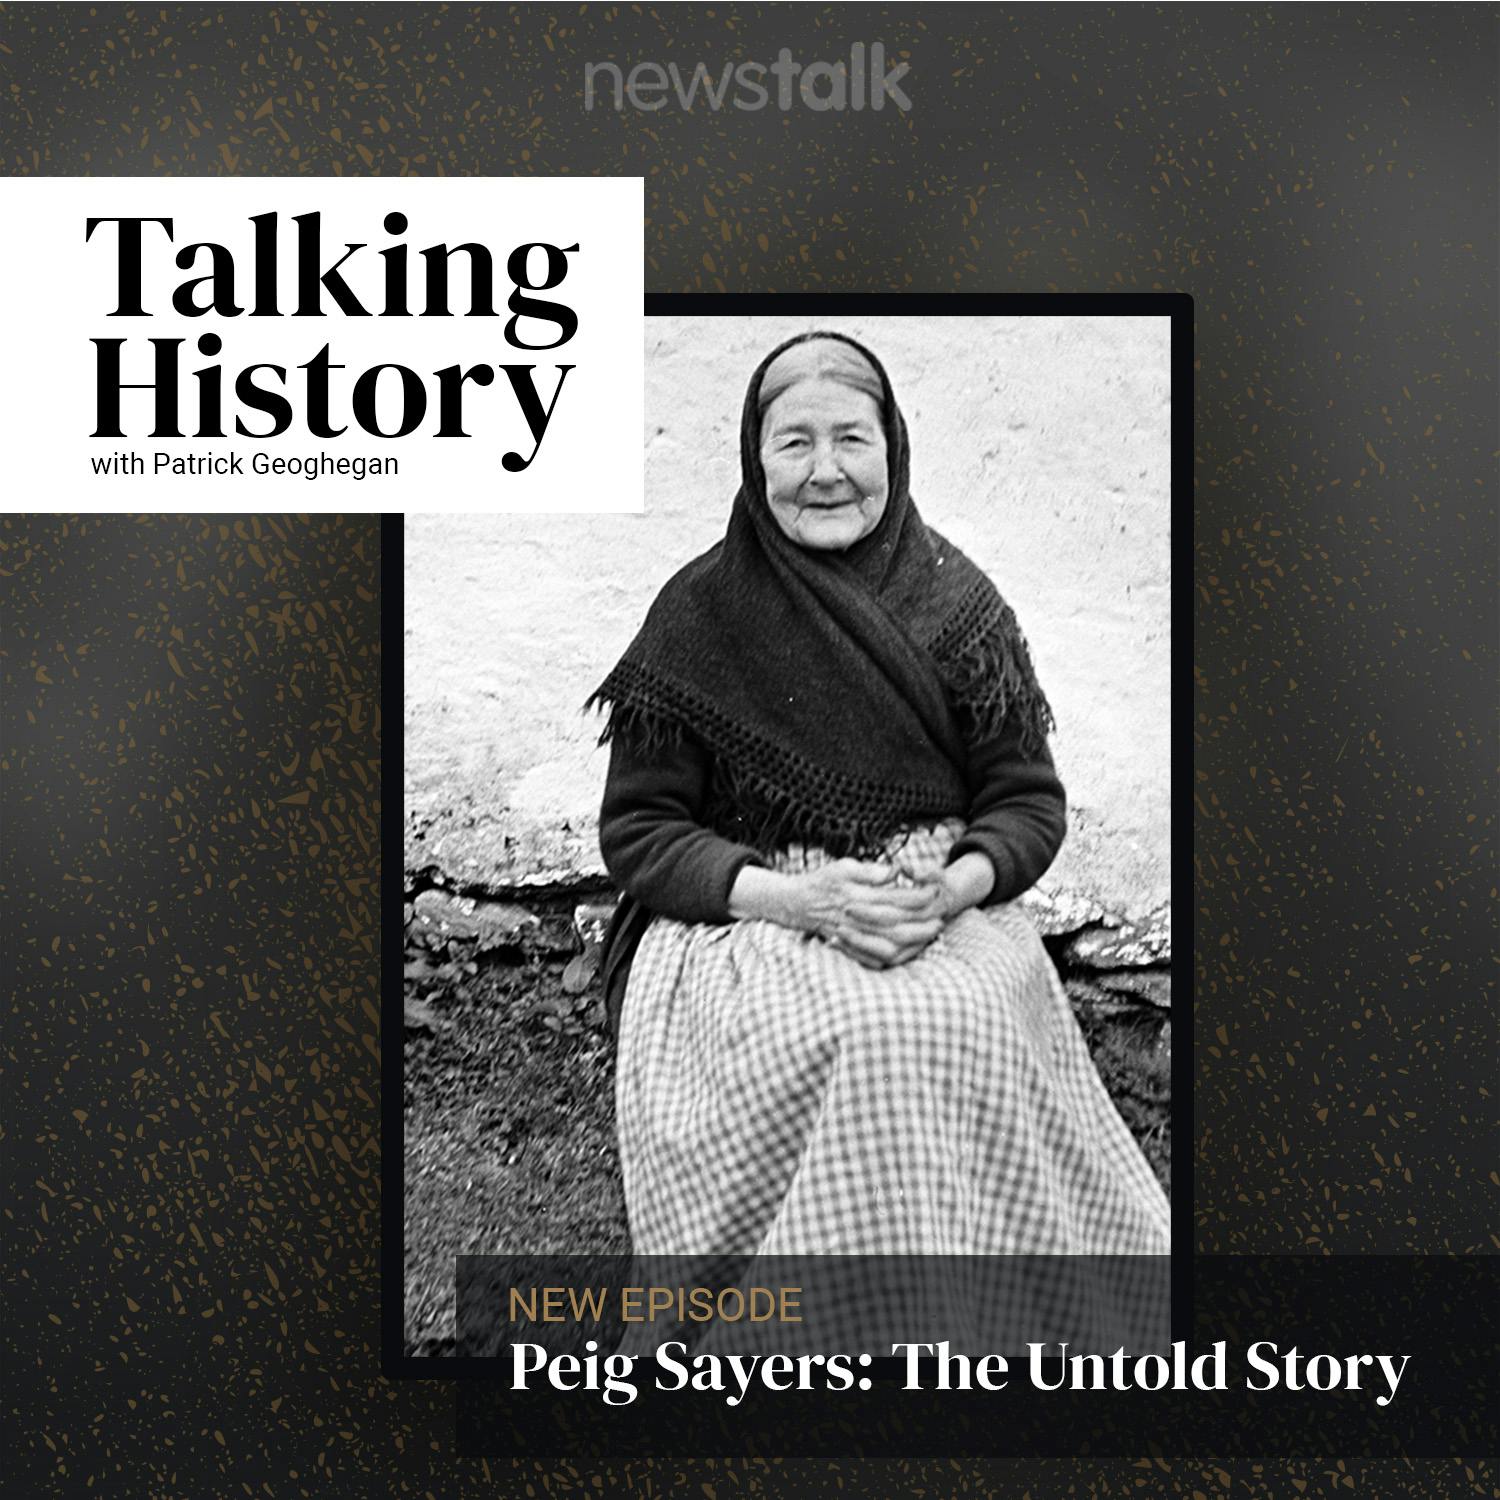 Peig Sayers: The Untold Story